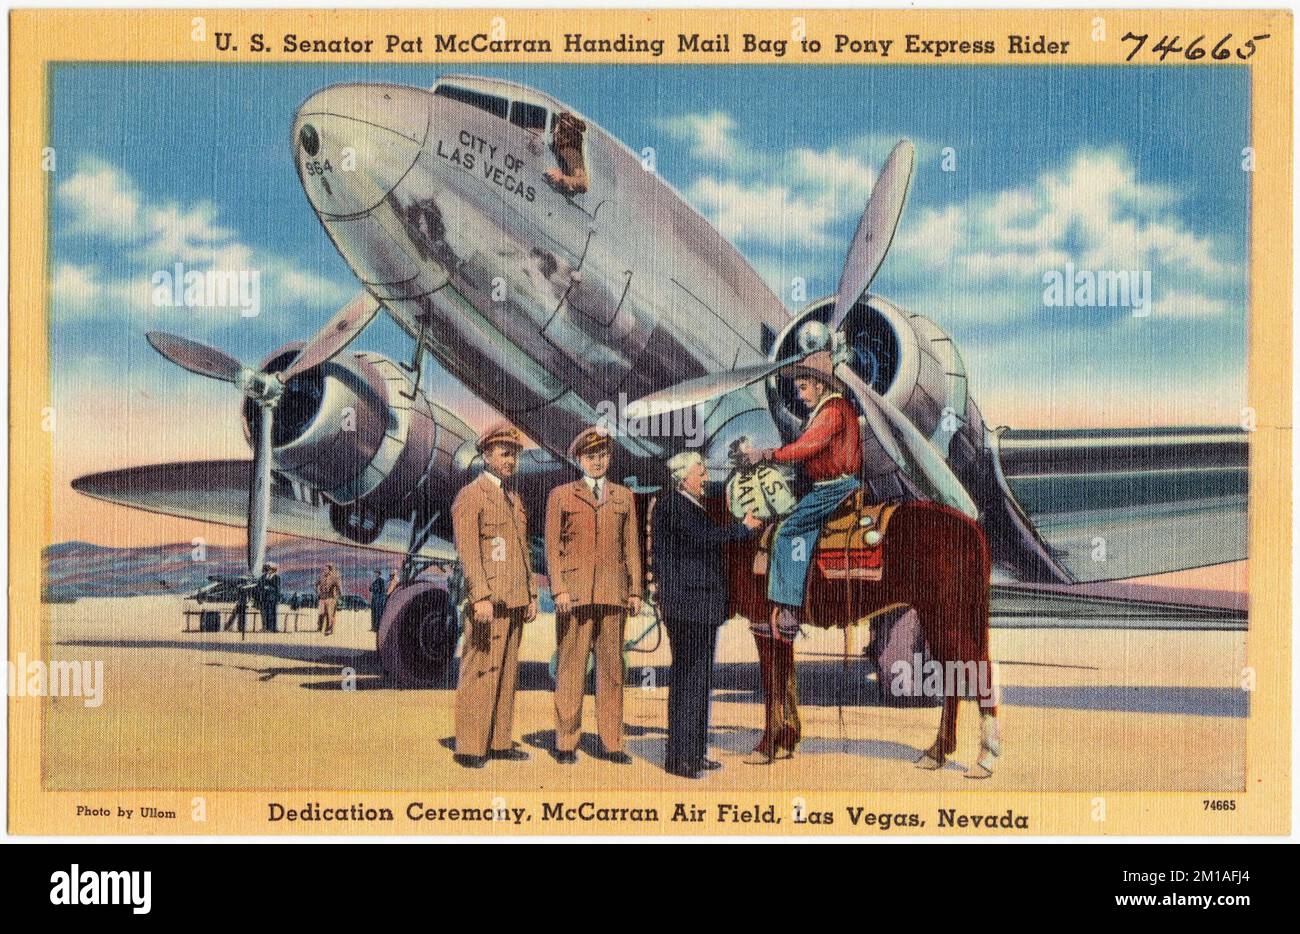 U.S. Senator Pat McCarran handing mail bag to Pony Express rider, Dedication Ceremony, McCarran Air Field, Las Vegas, Nevada , Airports, Tichnor Brothers Collection, postcards of the United States Stock Photo